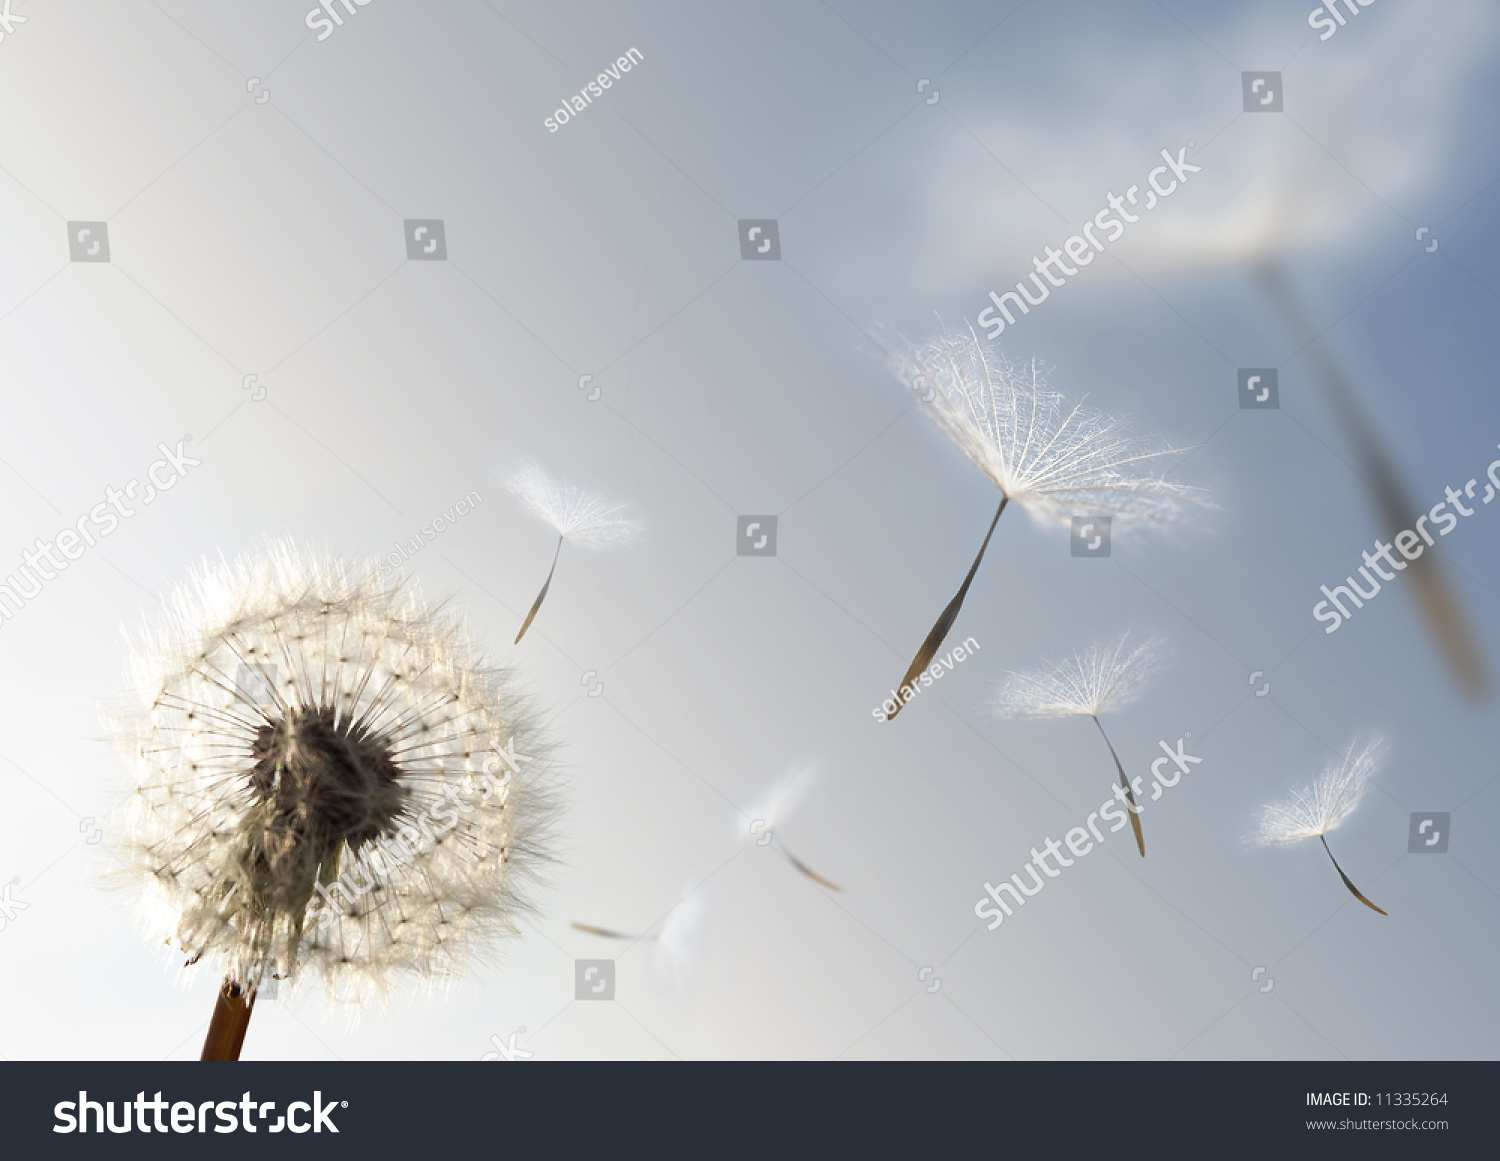 A Dandelion blowing seeds in the wind. #11335264